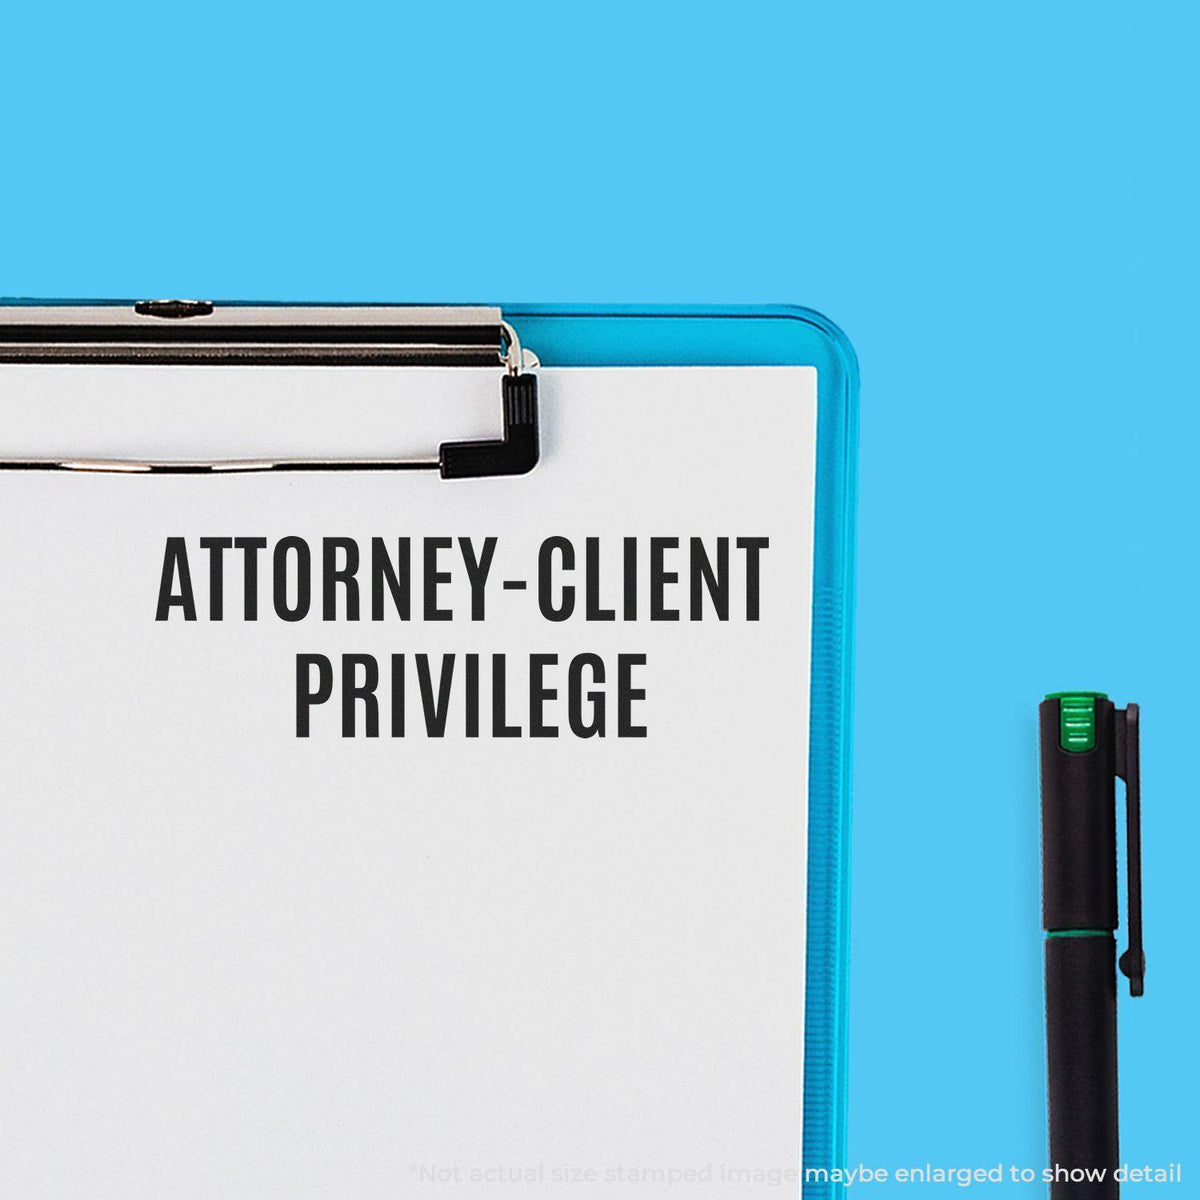 In Use Attorney-Client Privilege Rubber Stamp Image